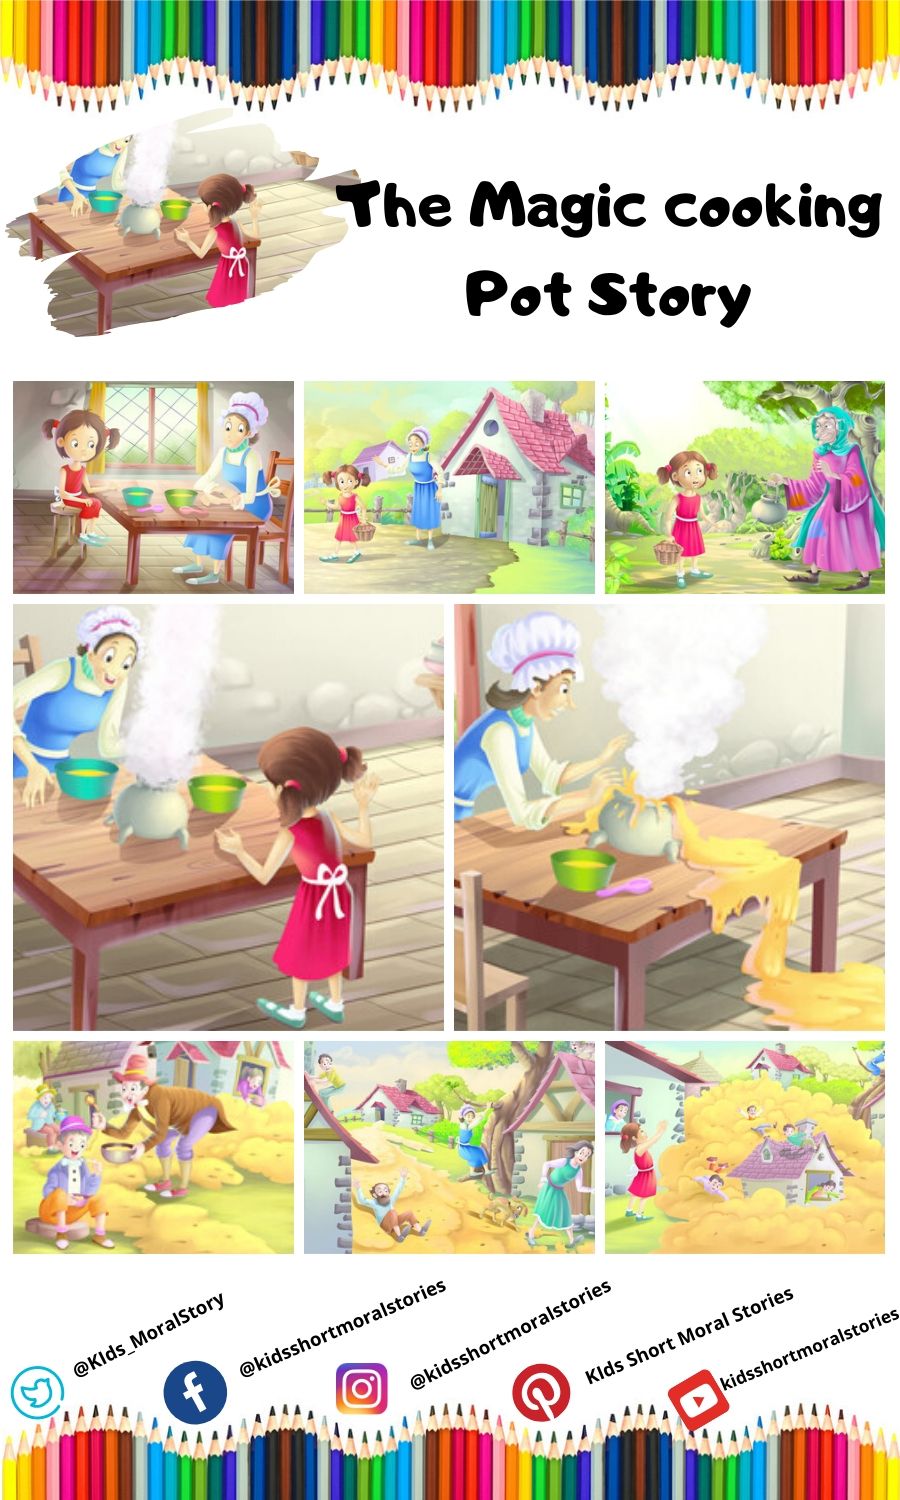 The Magic Cooking Pot Story